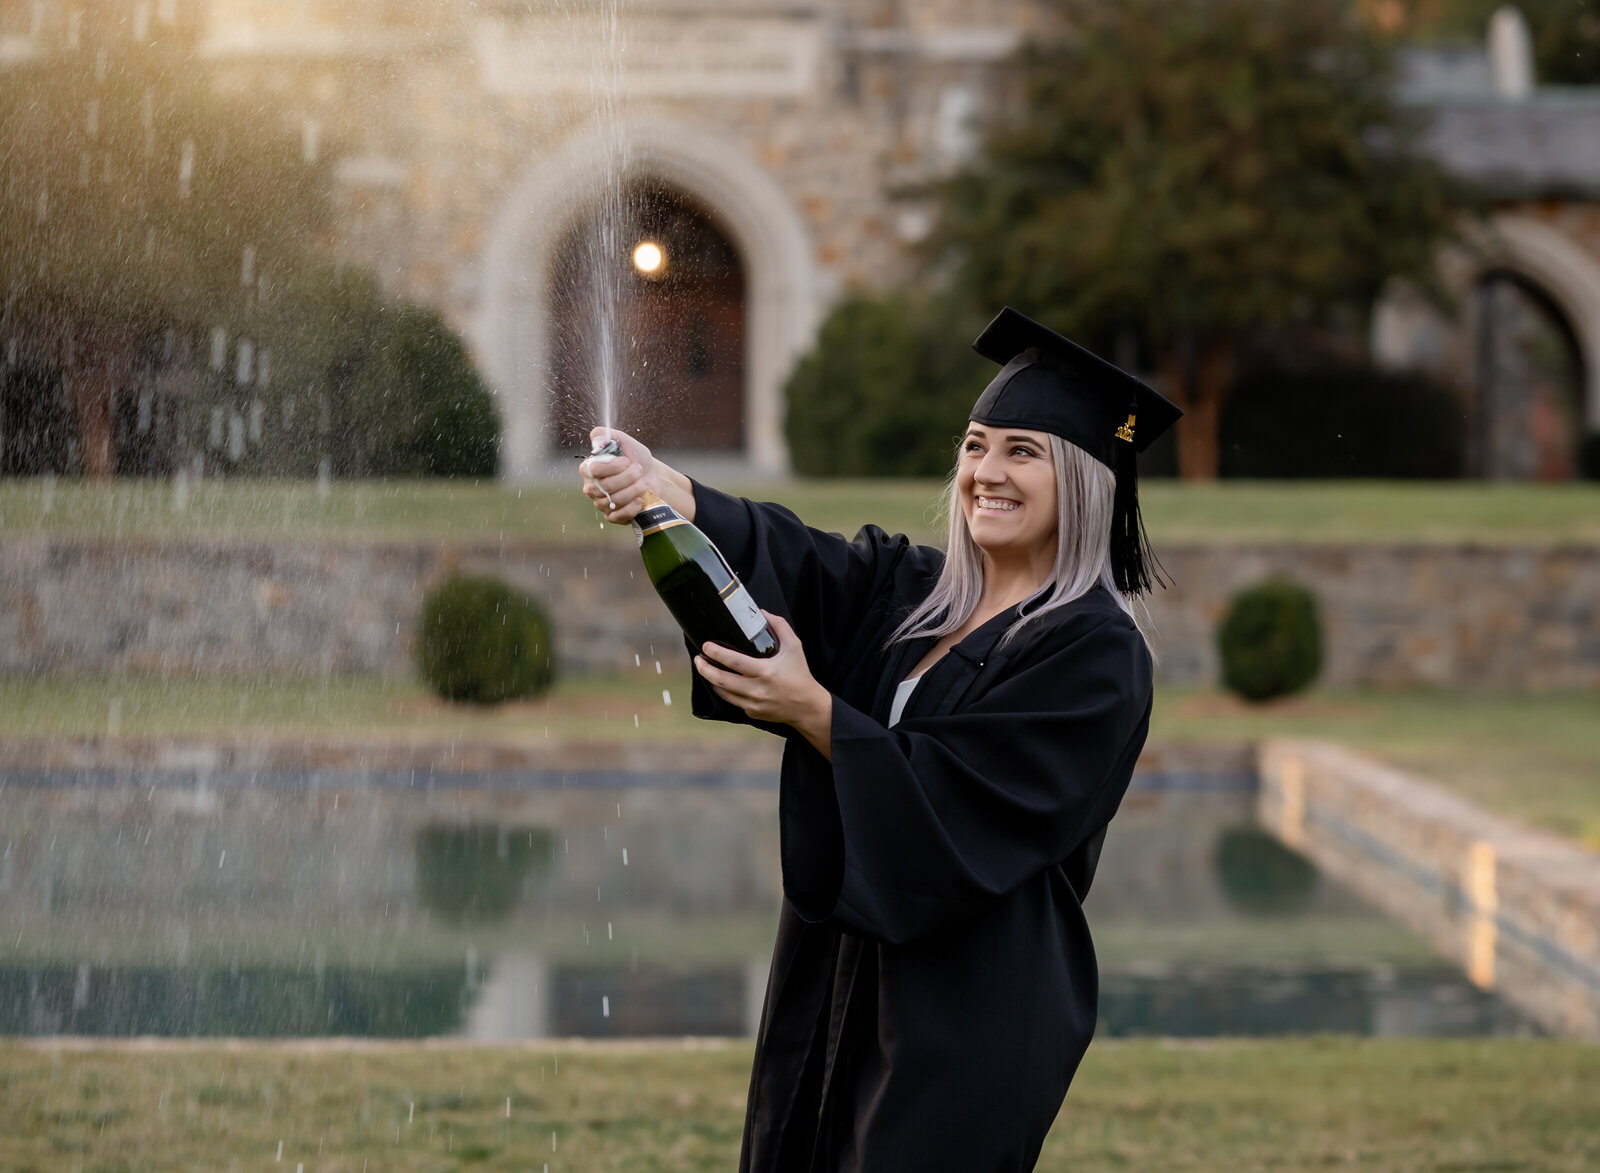 graduation picture with champagne bottle